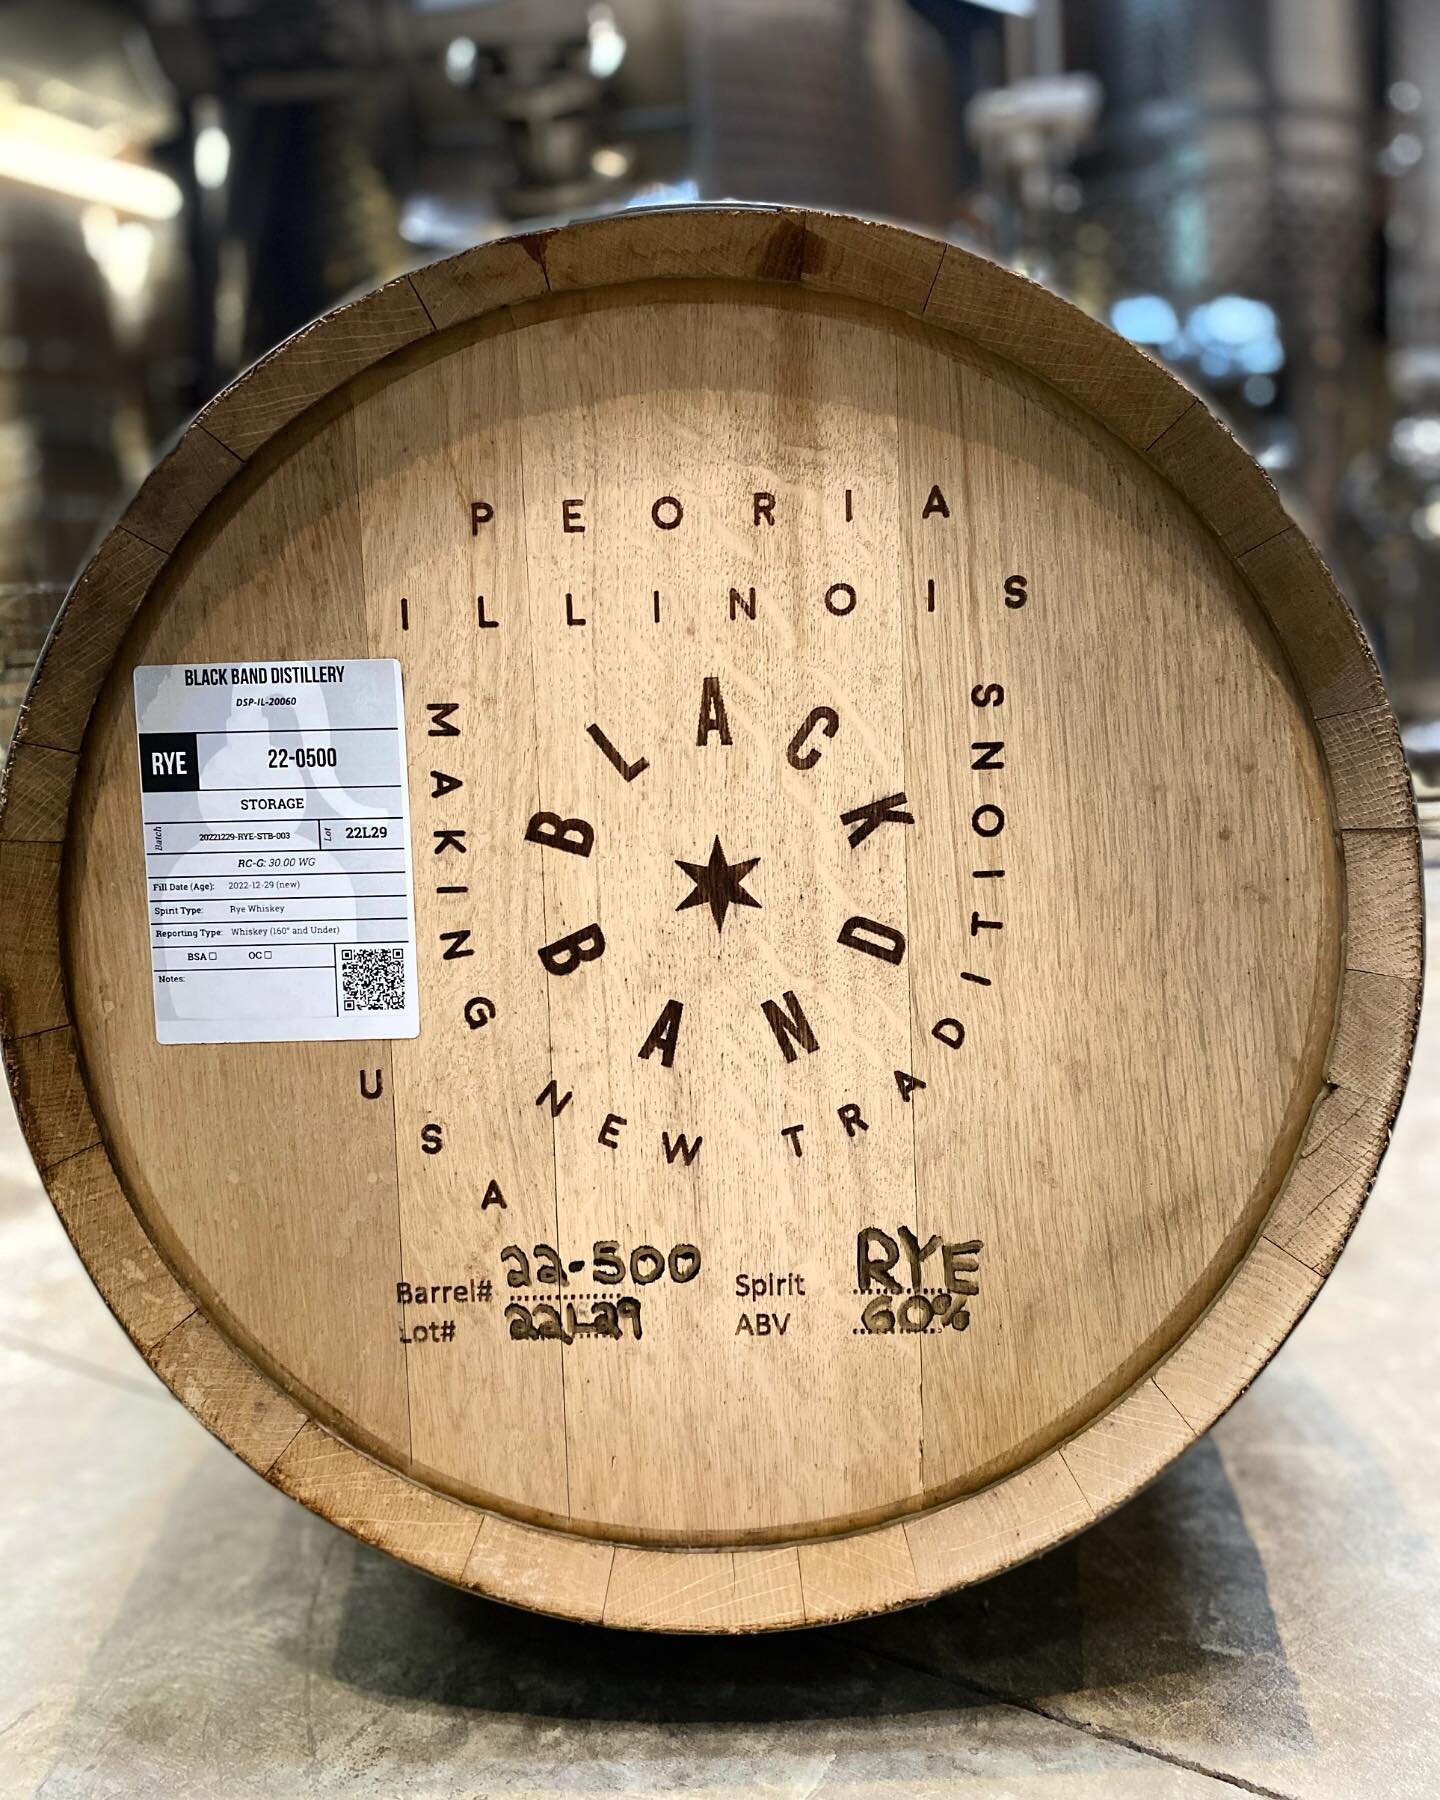 We don&rsquo;t say much about our whiskey production. We&rsquo;re quietly laying down barrels for the years to come. Then along comes a milestone that our fans might enjoy and we feel compelled to share. It&rsquo;s no small feat to hit 500 barrels in